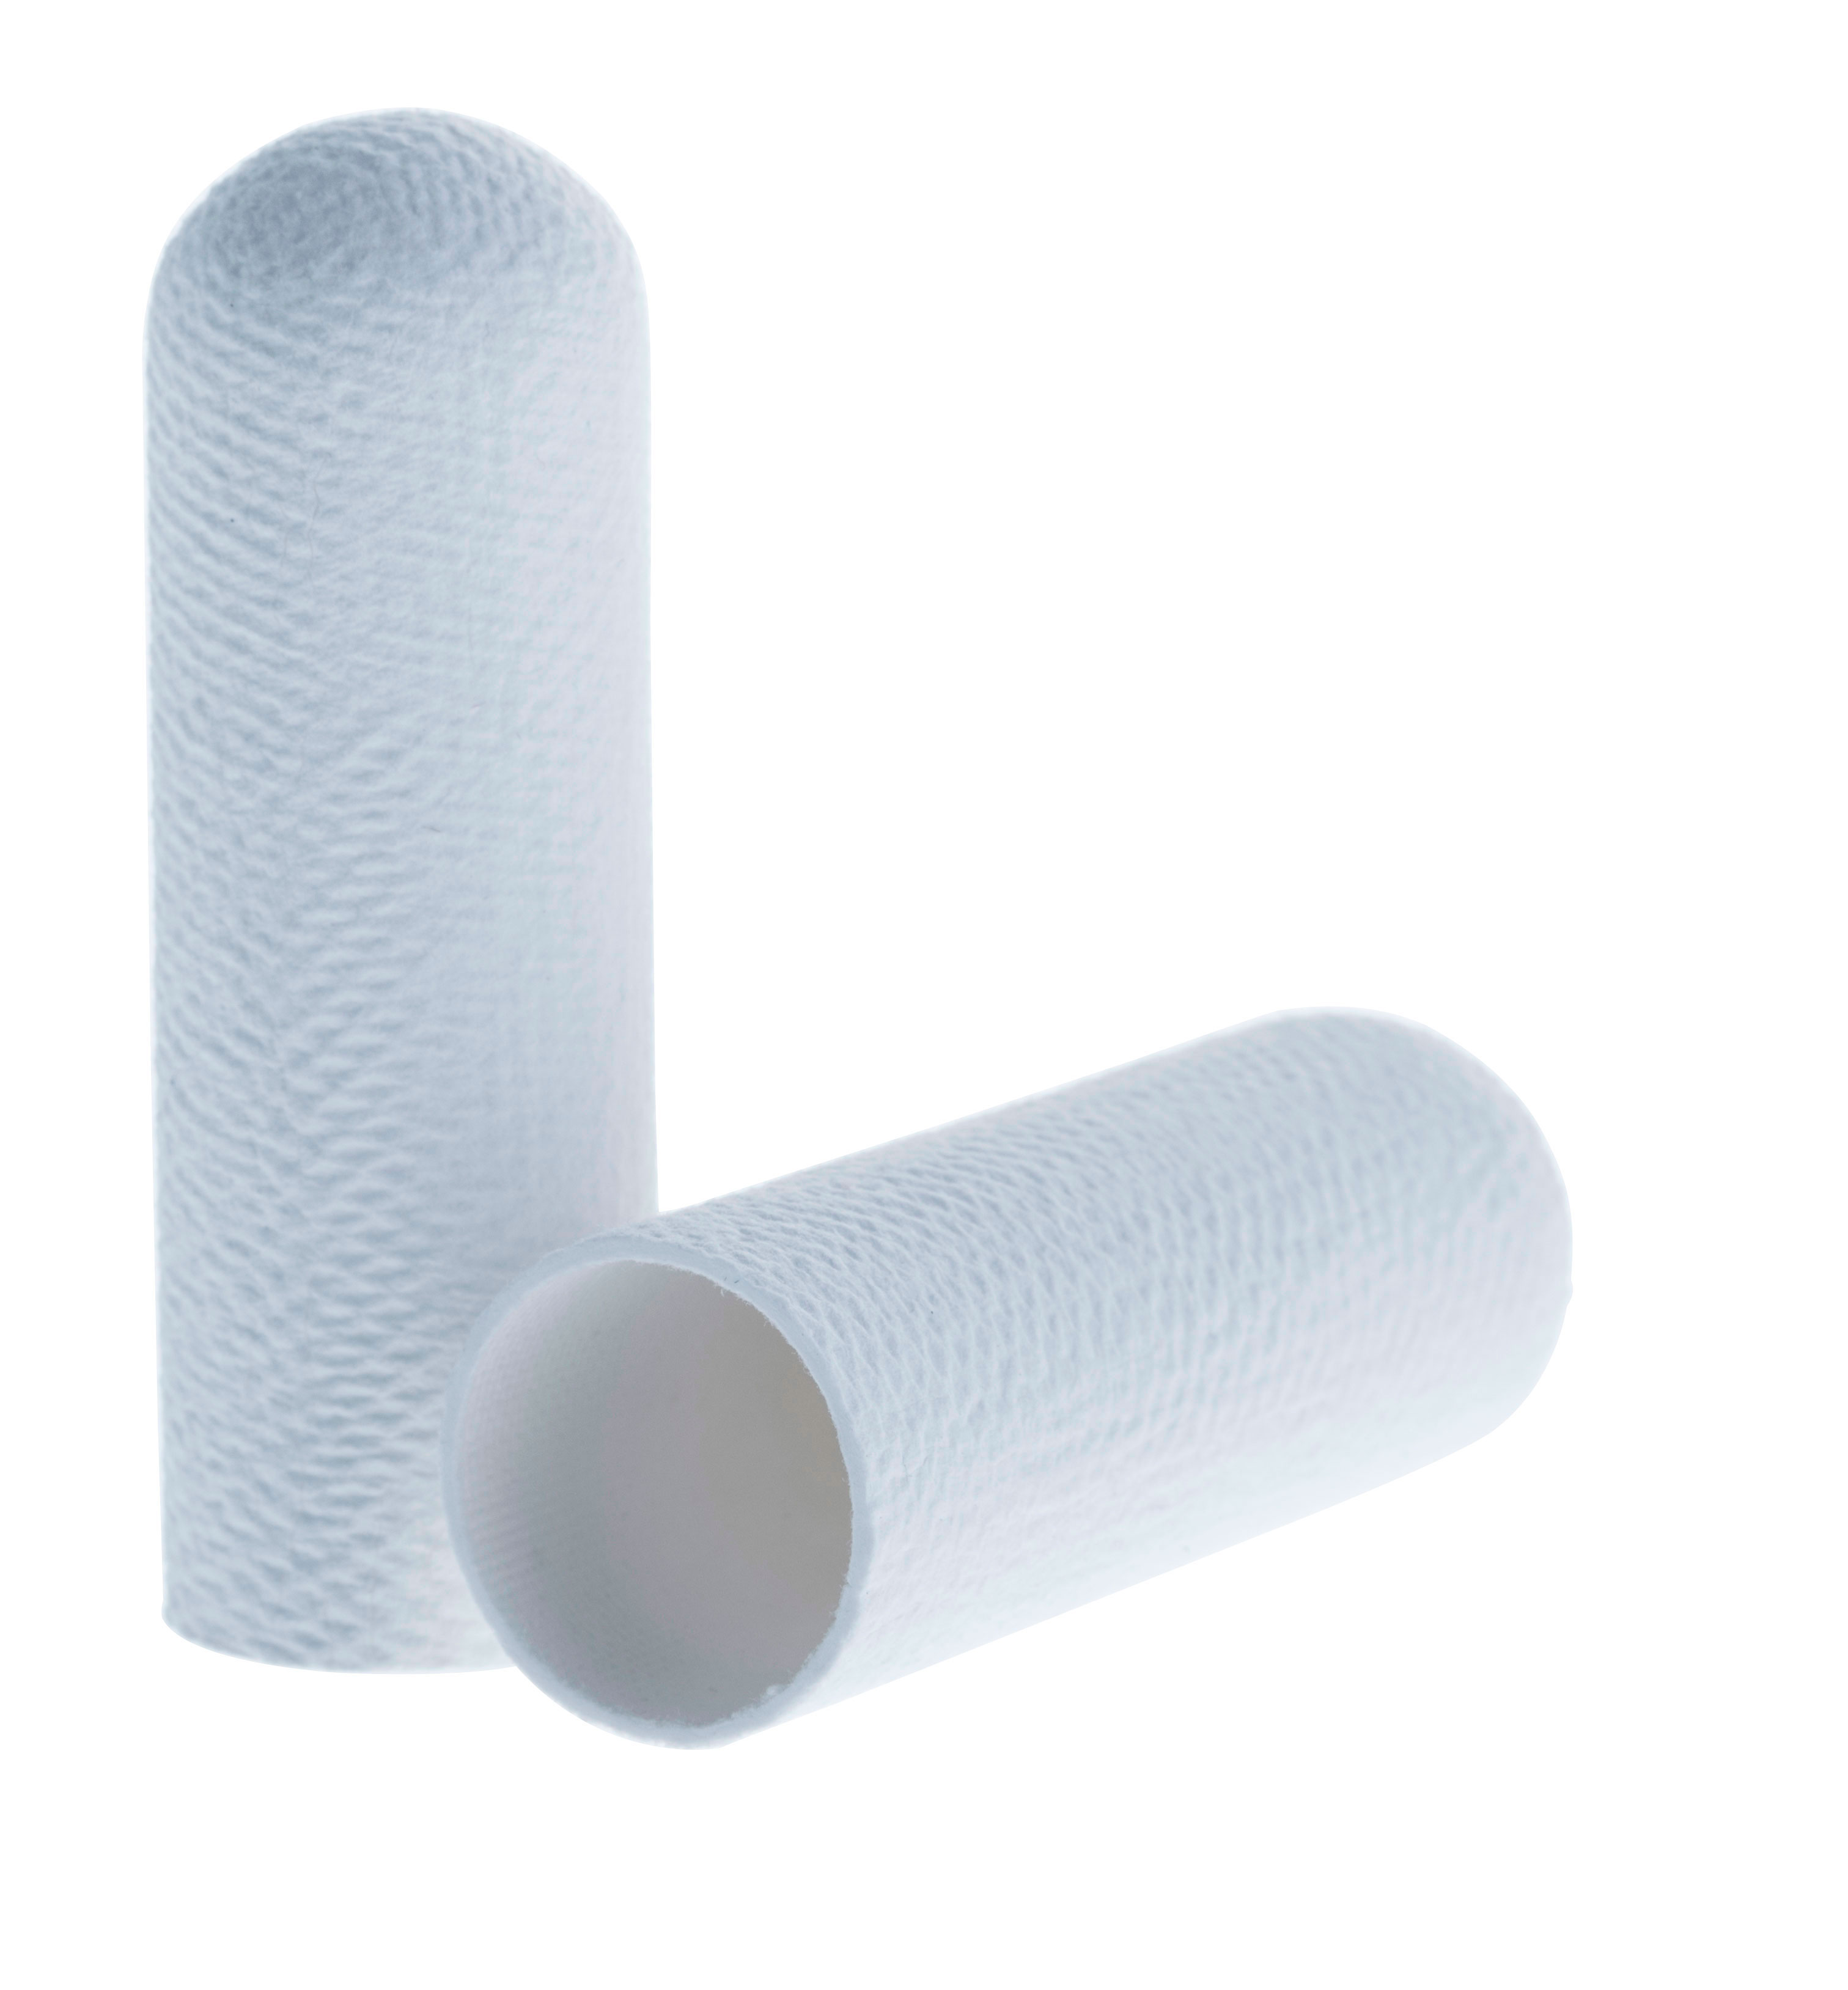 Cellulose extraction thimbles for Soxhlet extraction. SCHARLAU. Standard cellulose cartridge. Dim. Øxlength: 35x150mm. Particle retention in liquid: Nom. 8-15 microns